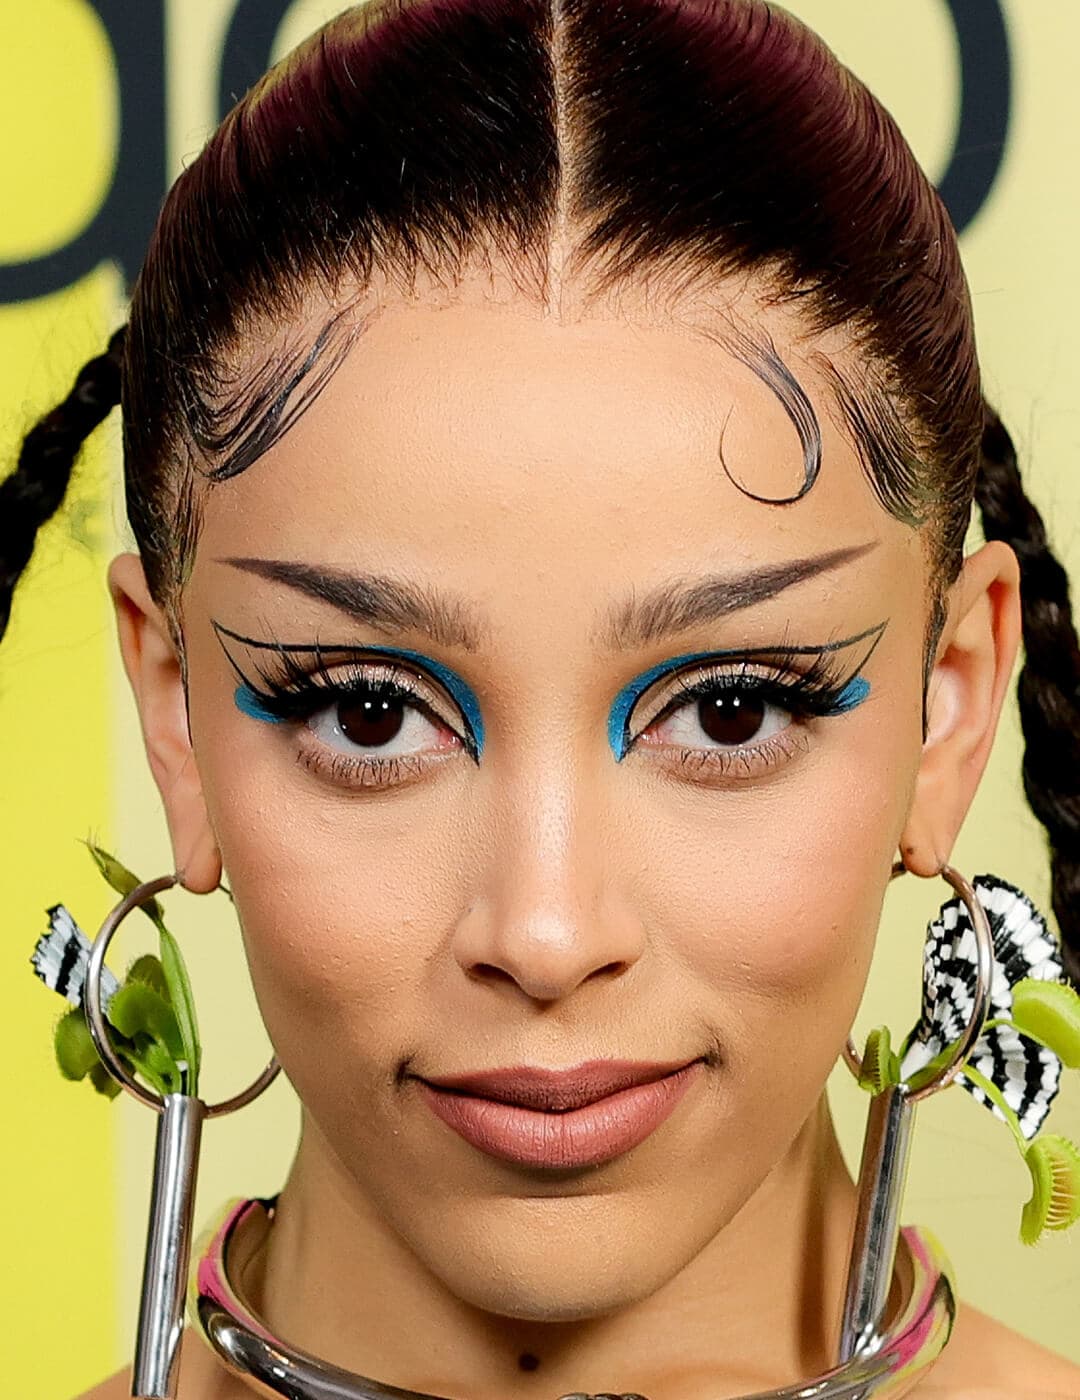 Doja Cat rocking a graphic blue and black eyeliner makeup look on the red carpet